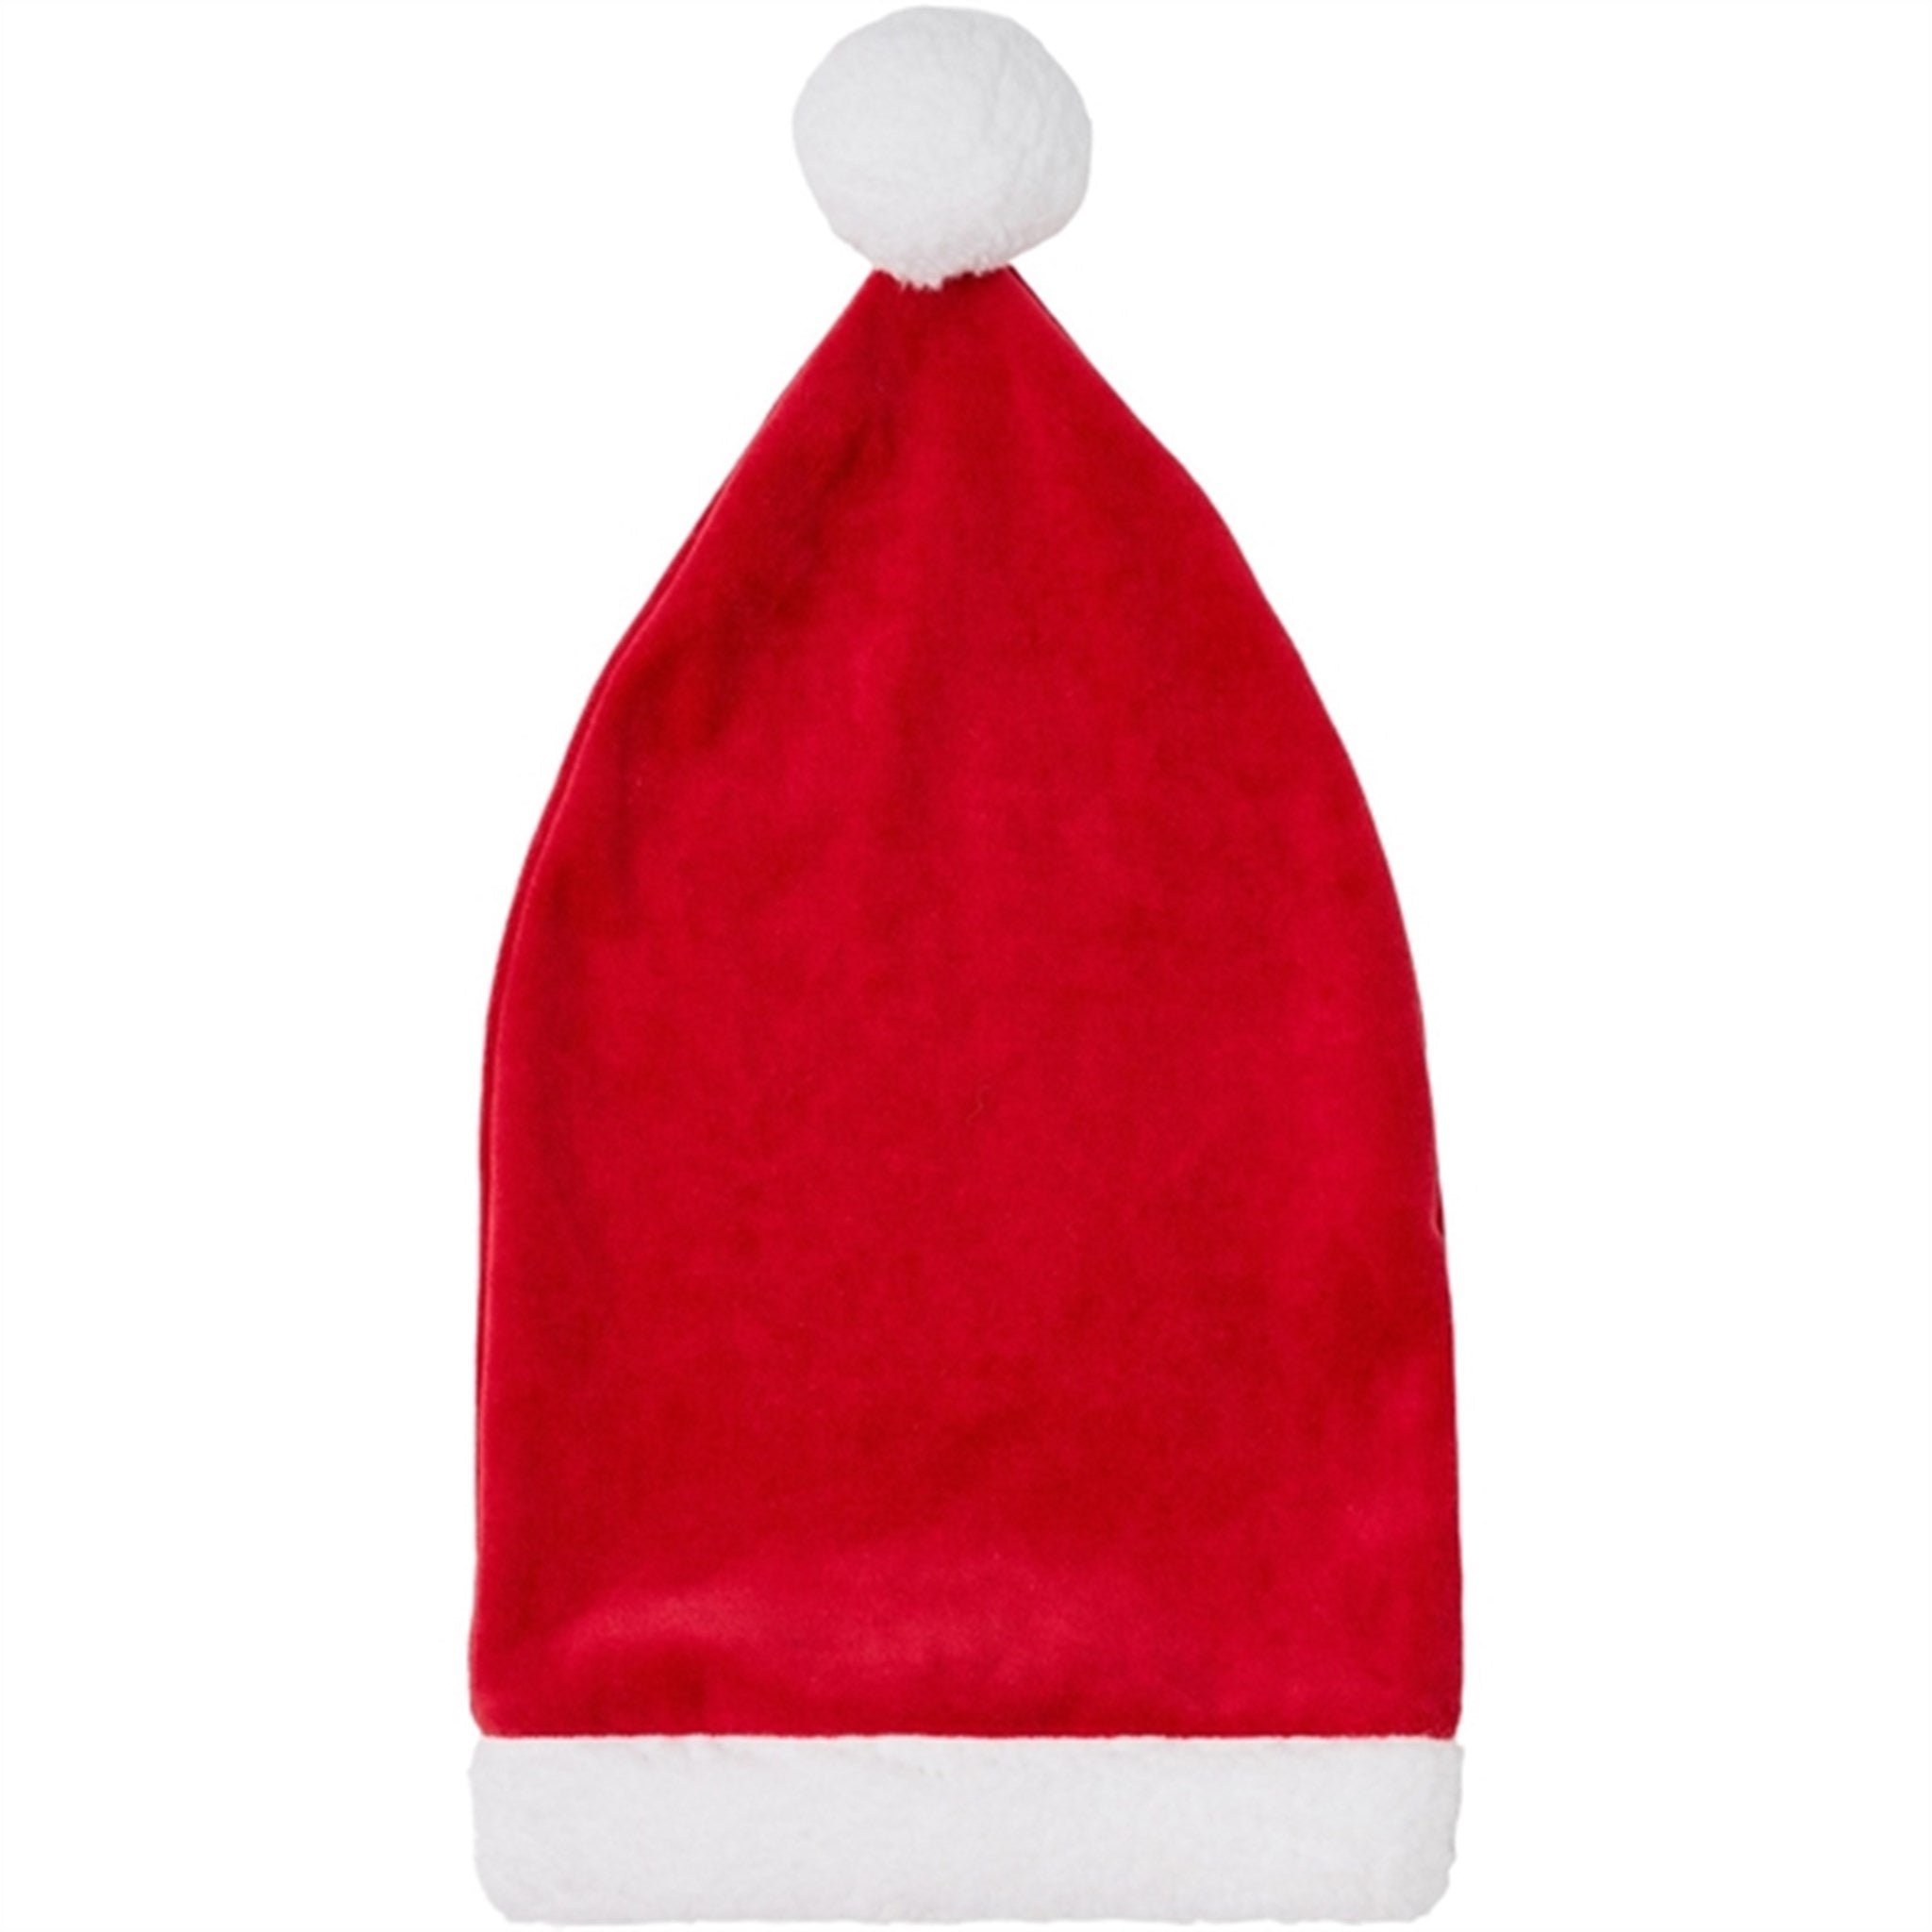 Name it Jester Red Ristmas Santa Hat